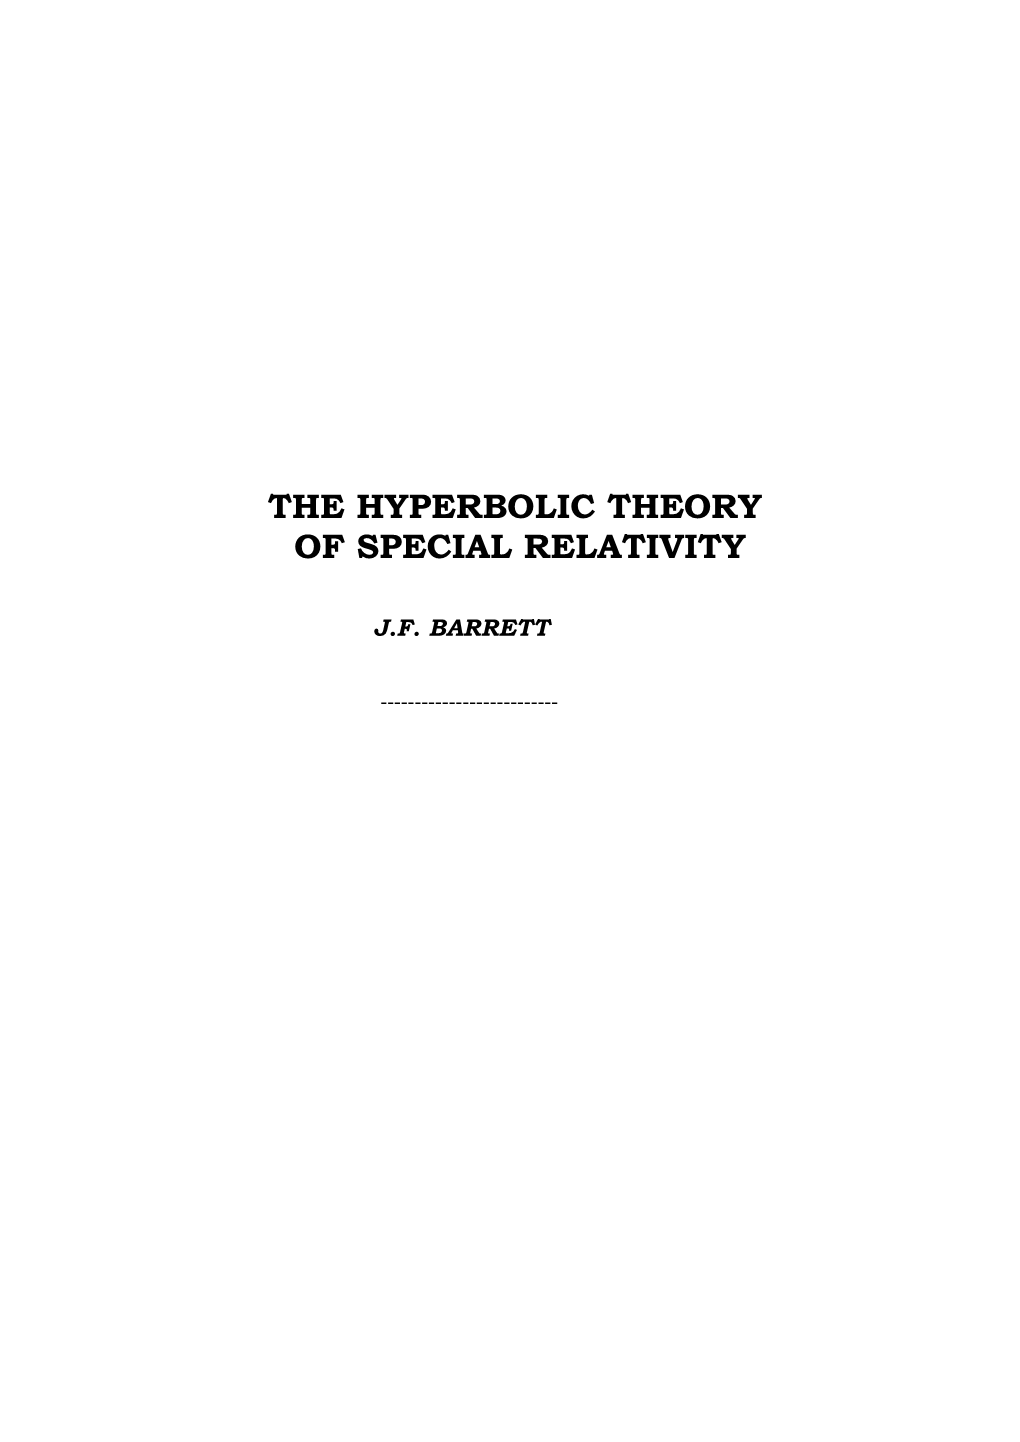 The Hyperbolic Theory of Special Relativity